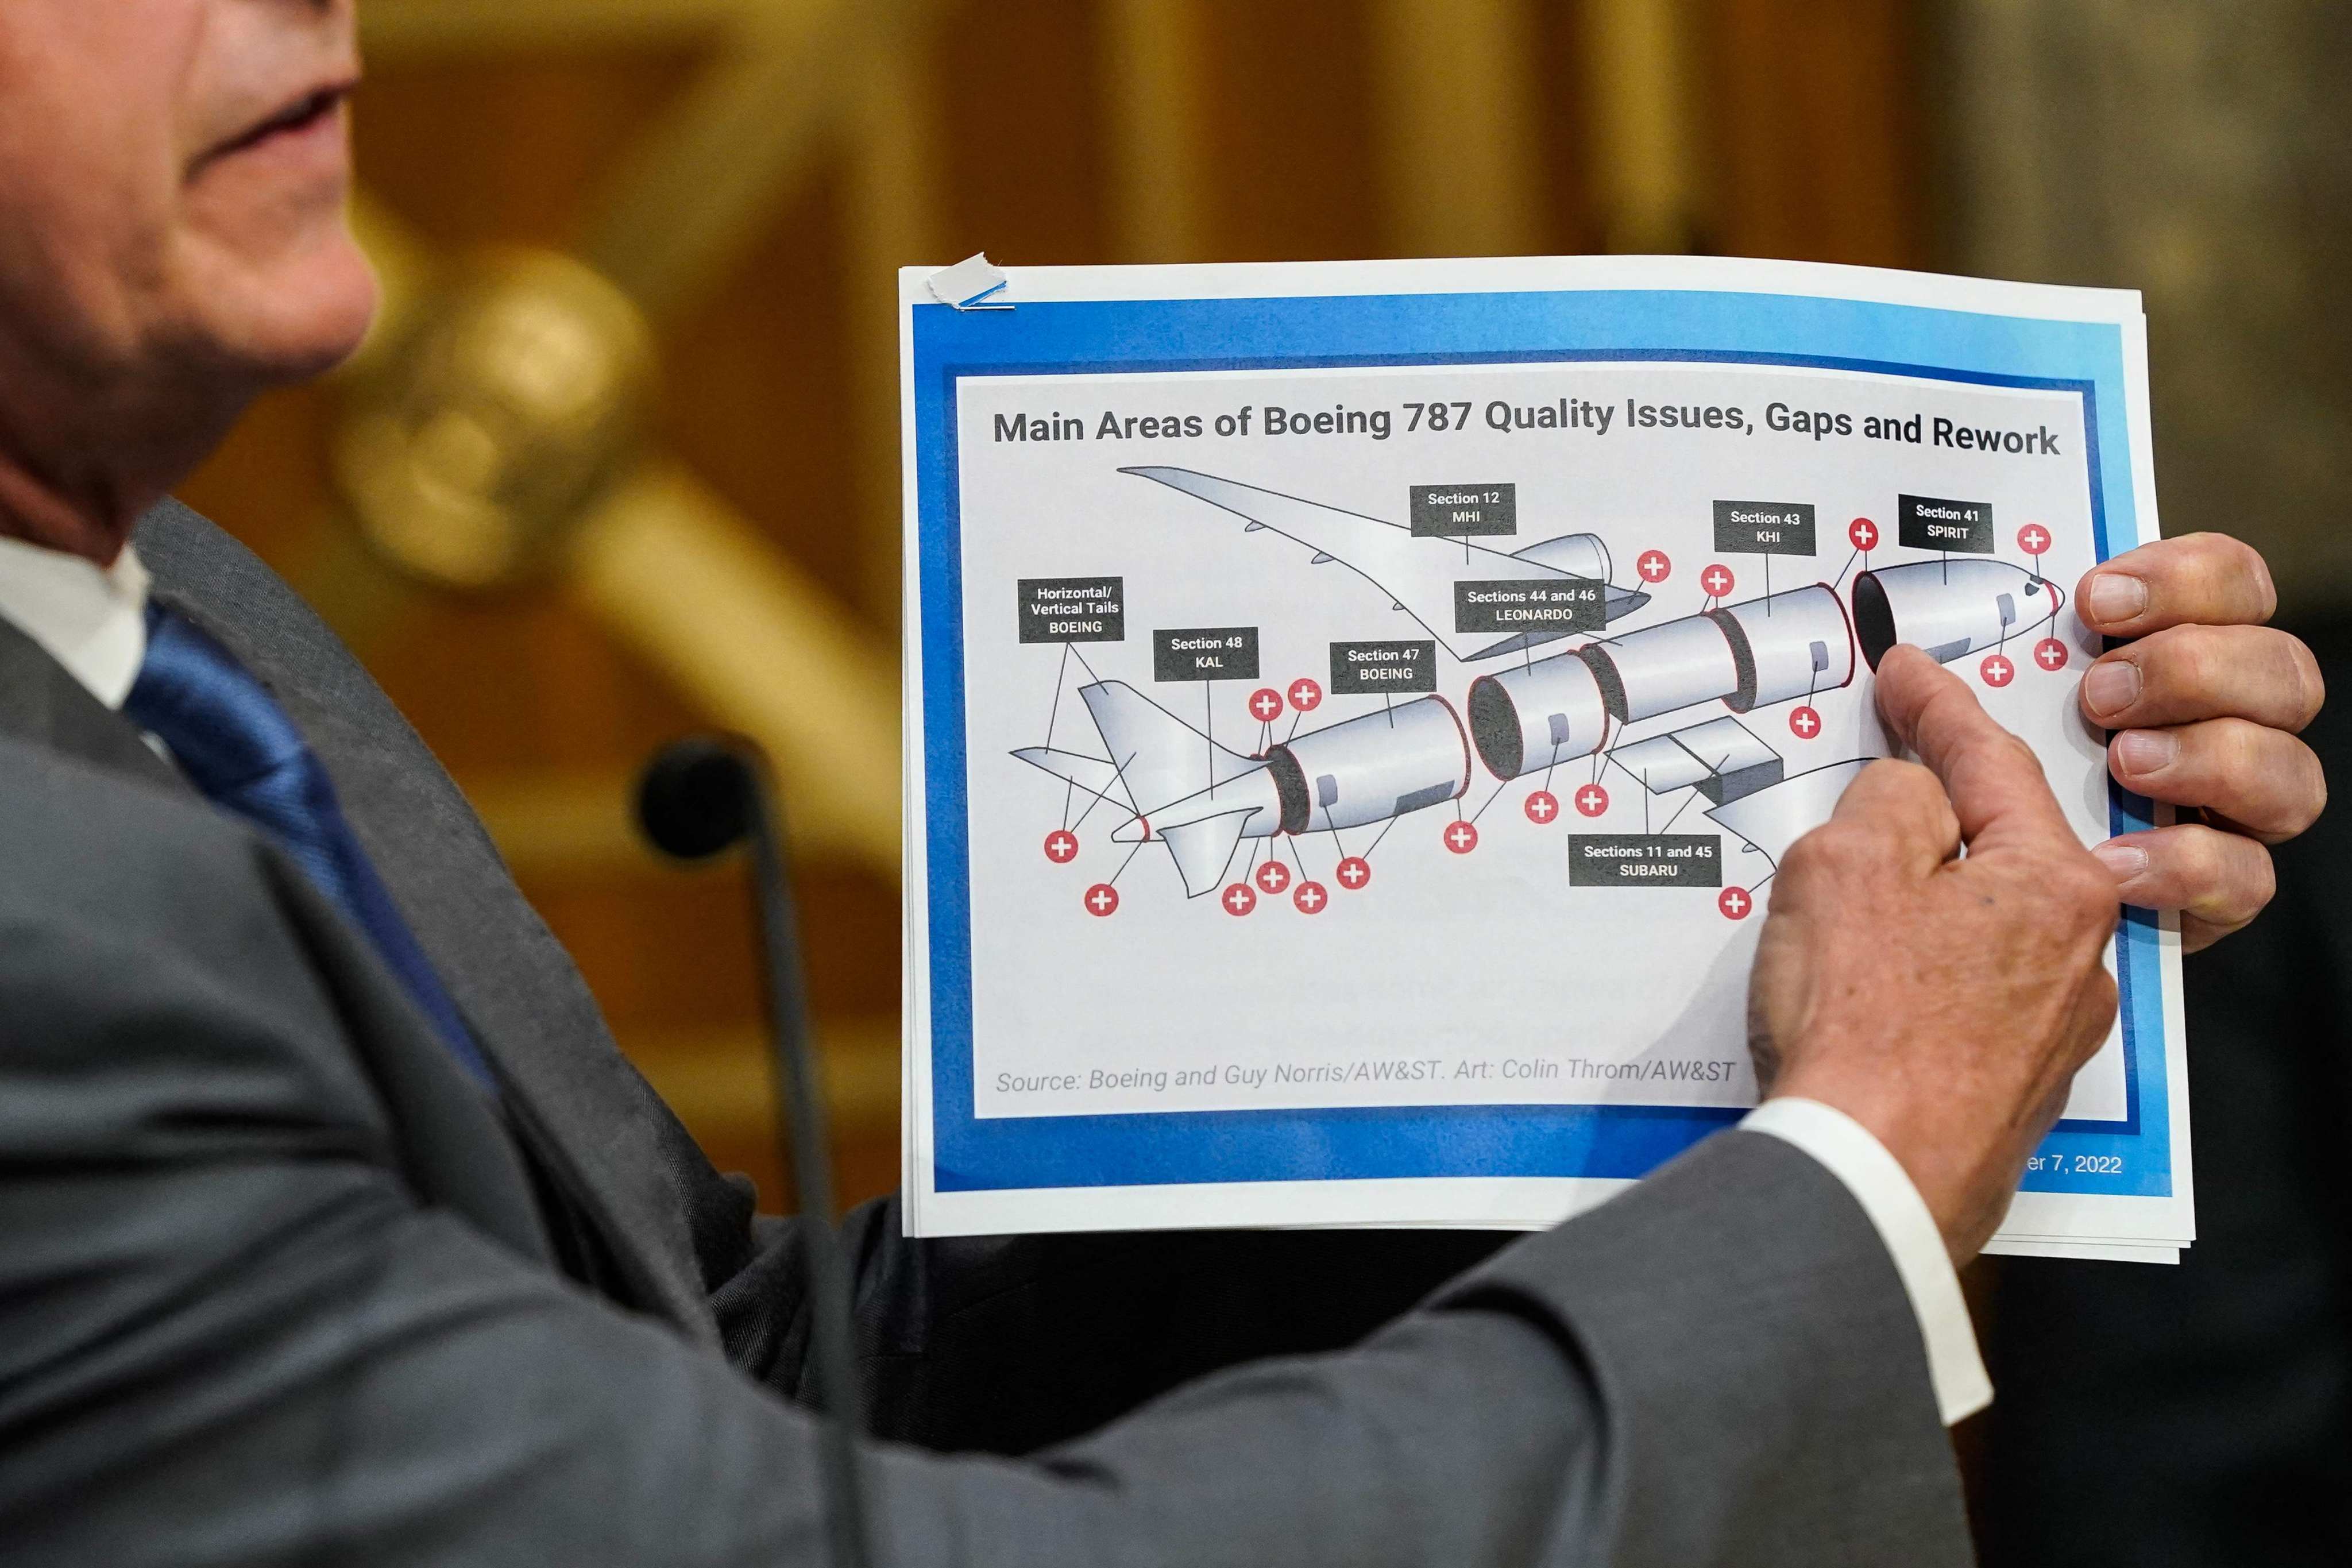 US Senator Roger Marshall holds up a graphic illustrating quality issues with a Boeing 787 plane during a hearing on Wednesday by the US Senate Homeland Security and Governmental Affairs Subcommittee on Investigations on Boeing’s safety culture. Photo: AFP